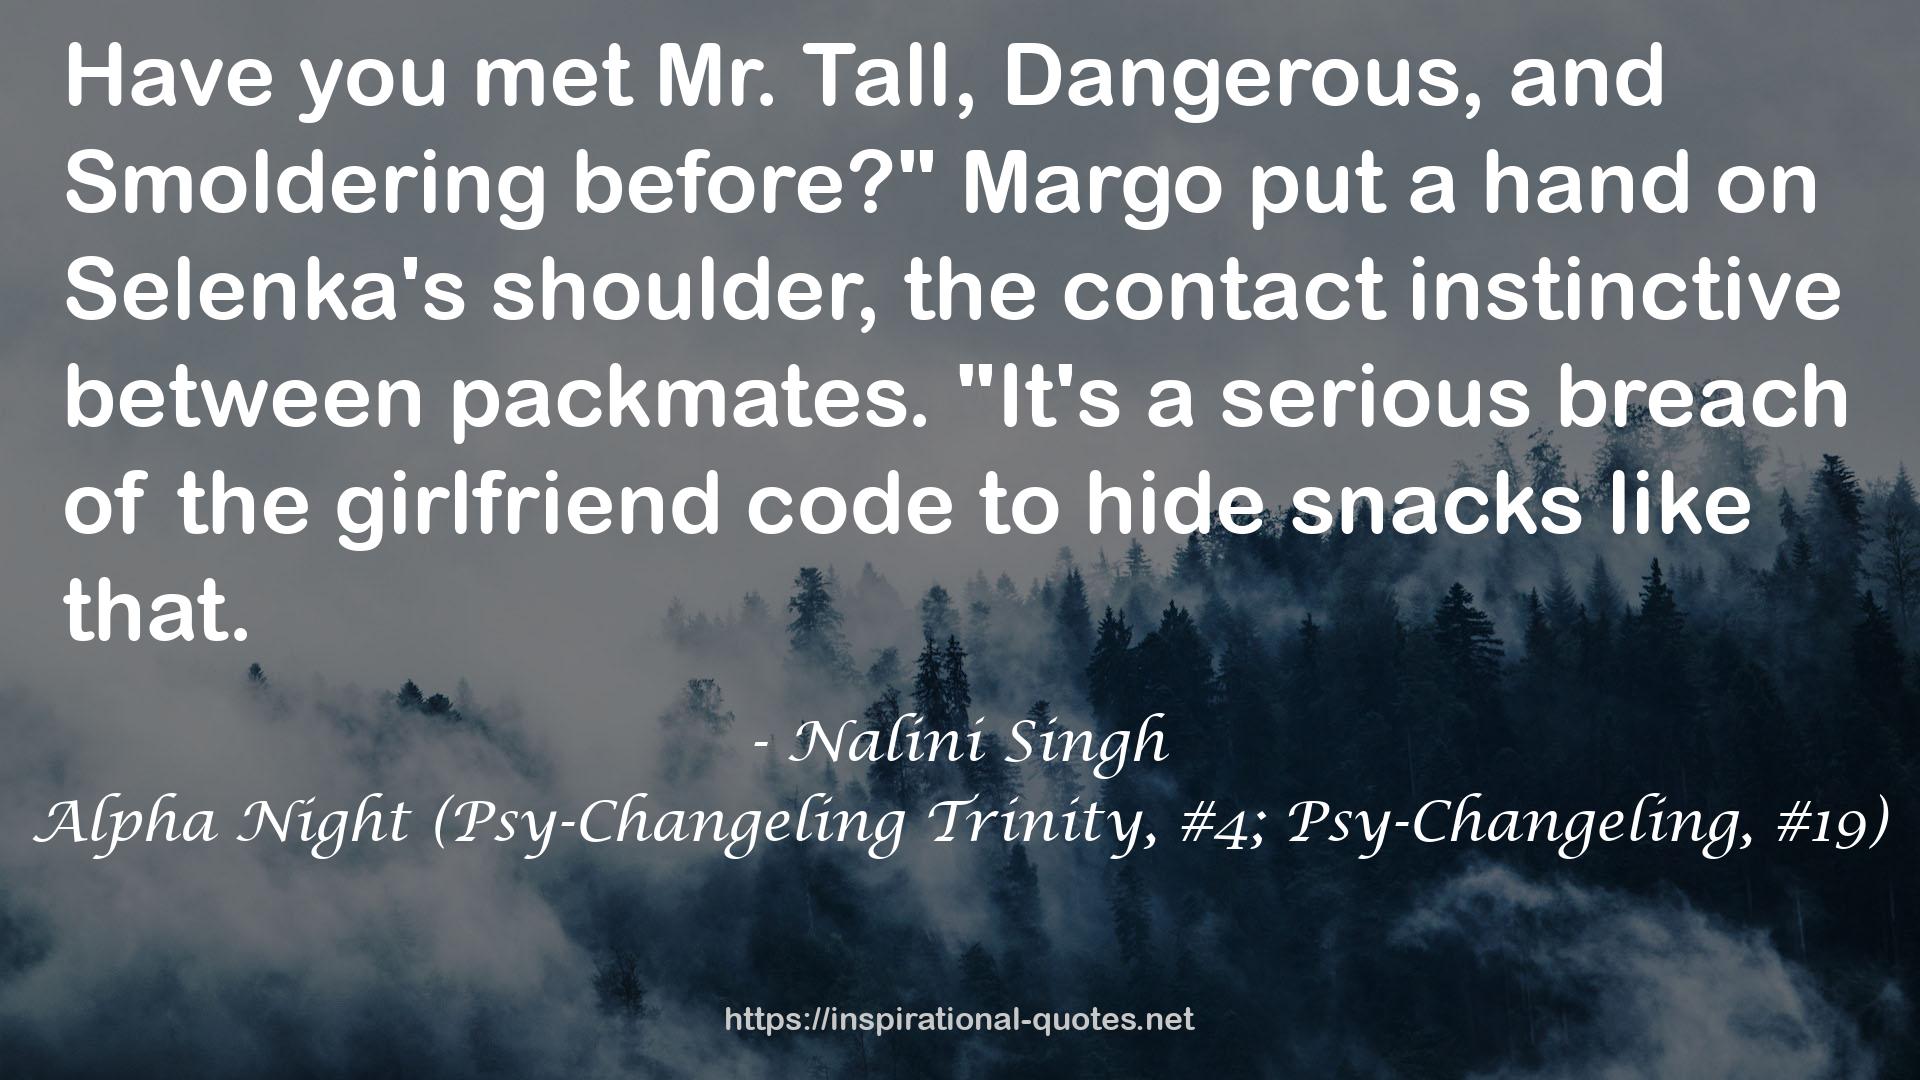 Alpha Night (Psy-Changeling Trinity, #4; Psy-Changeling, #19) QUOTES